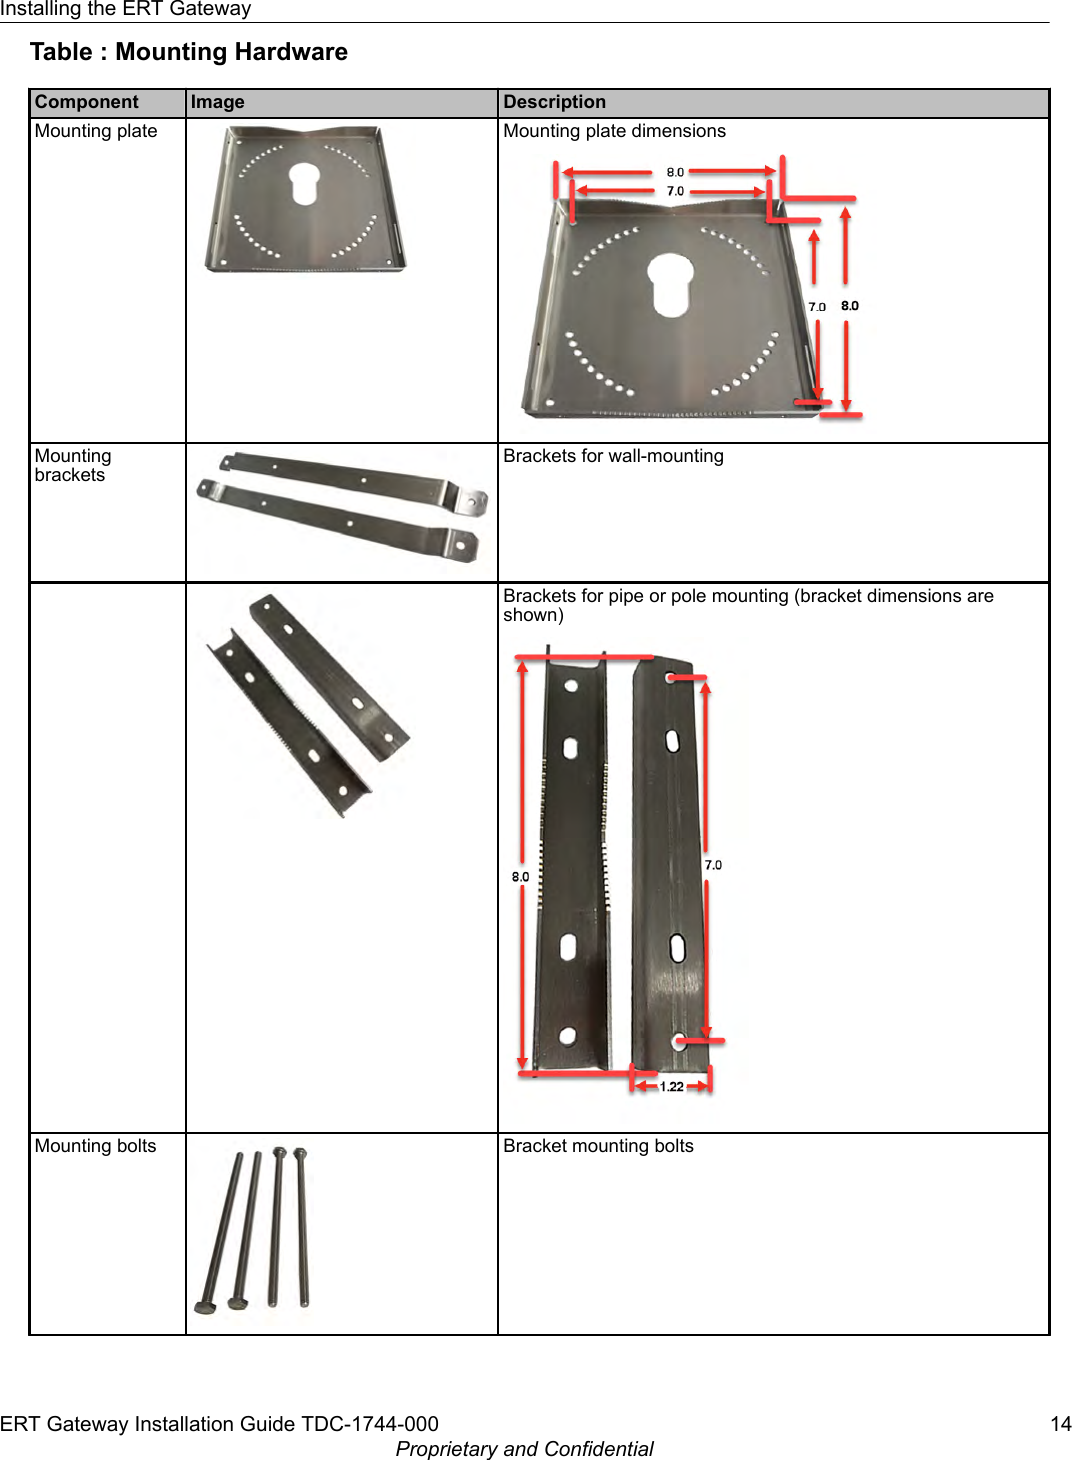 Table : Mounting HardwareComponent Image DescriptionMounting plate Mounting plate dimensionsMountingbracketsBrackets for wall-mountingBrackets for pipe or pole mounting (bracket dimensions areshown)Mounting bolts Bracket mounting boltsInstalling the ERT GatewayERT Gateway Installation Guide TDC-1744-000 14Proprietary and Confidential